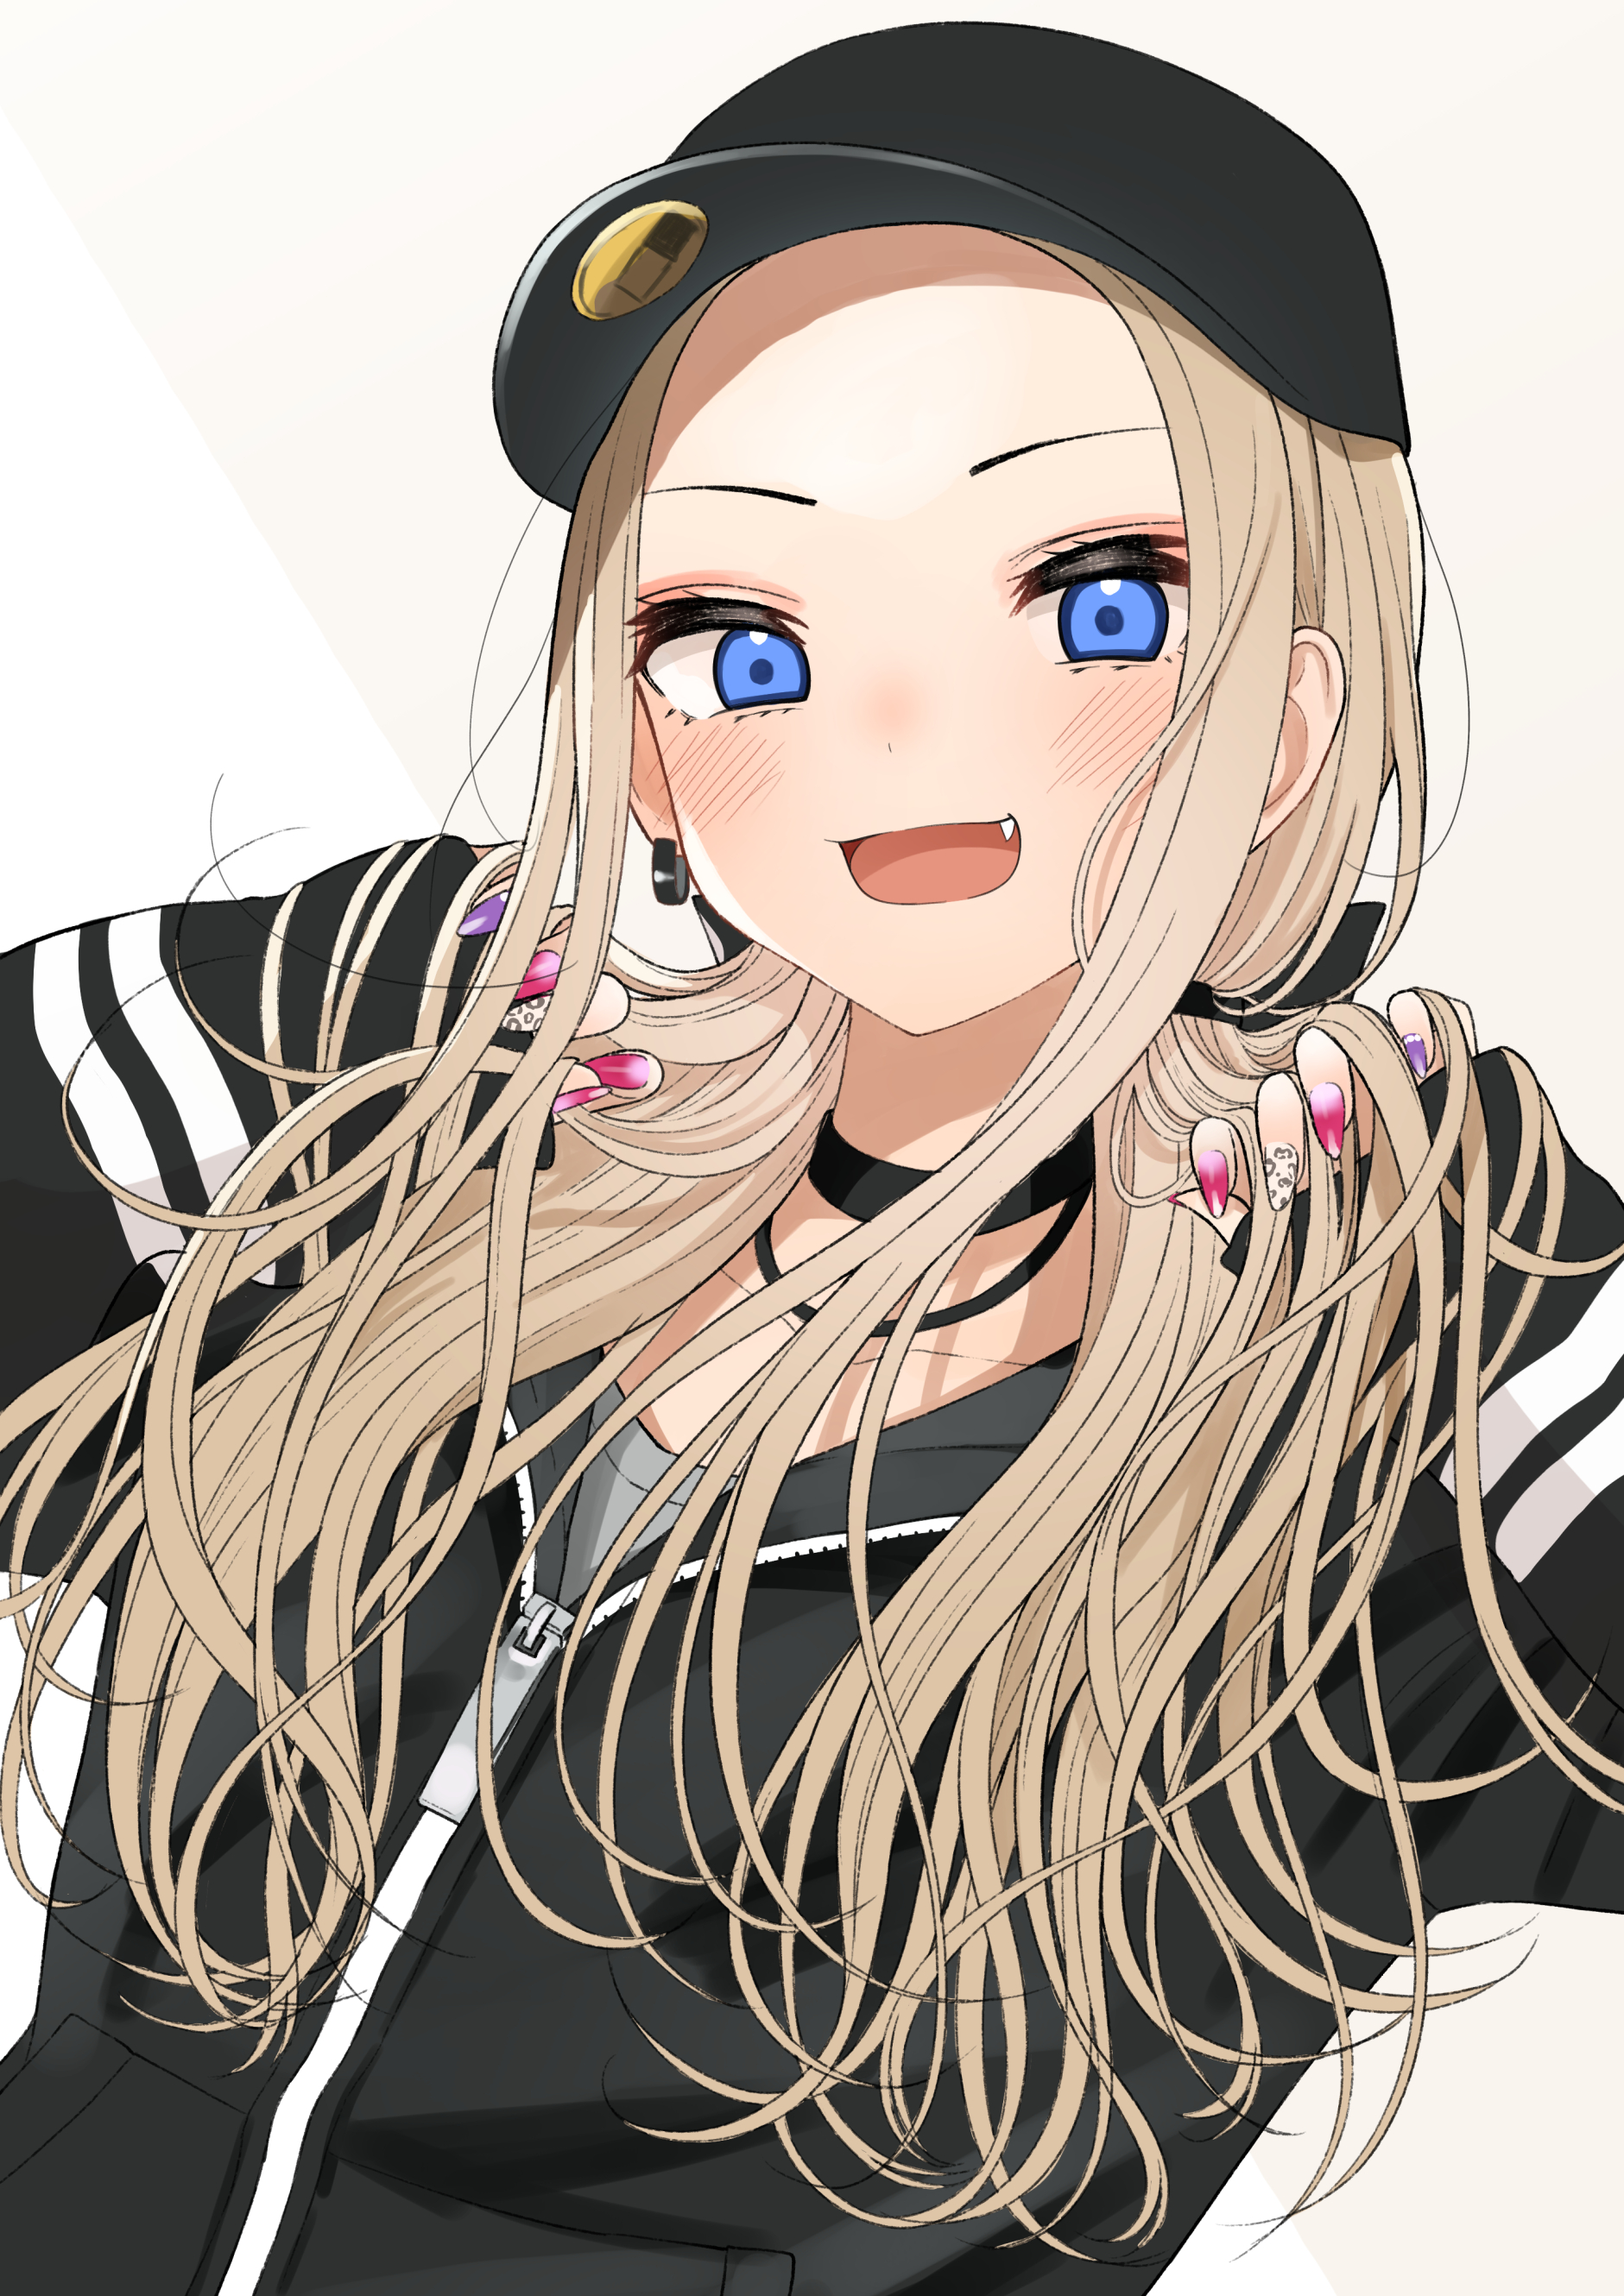 Anime 1881x2660 anime anime girls 2D artwork digital art portrait portrait display looking at viewer blue eyes blonde touching hair Pixiv hands in hair open mouth hat